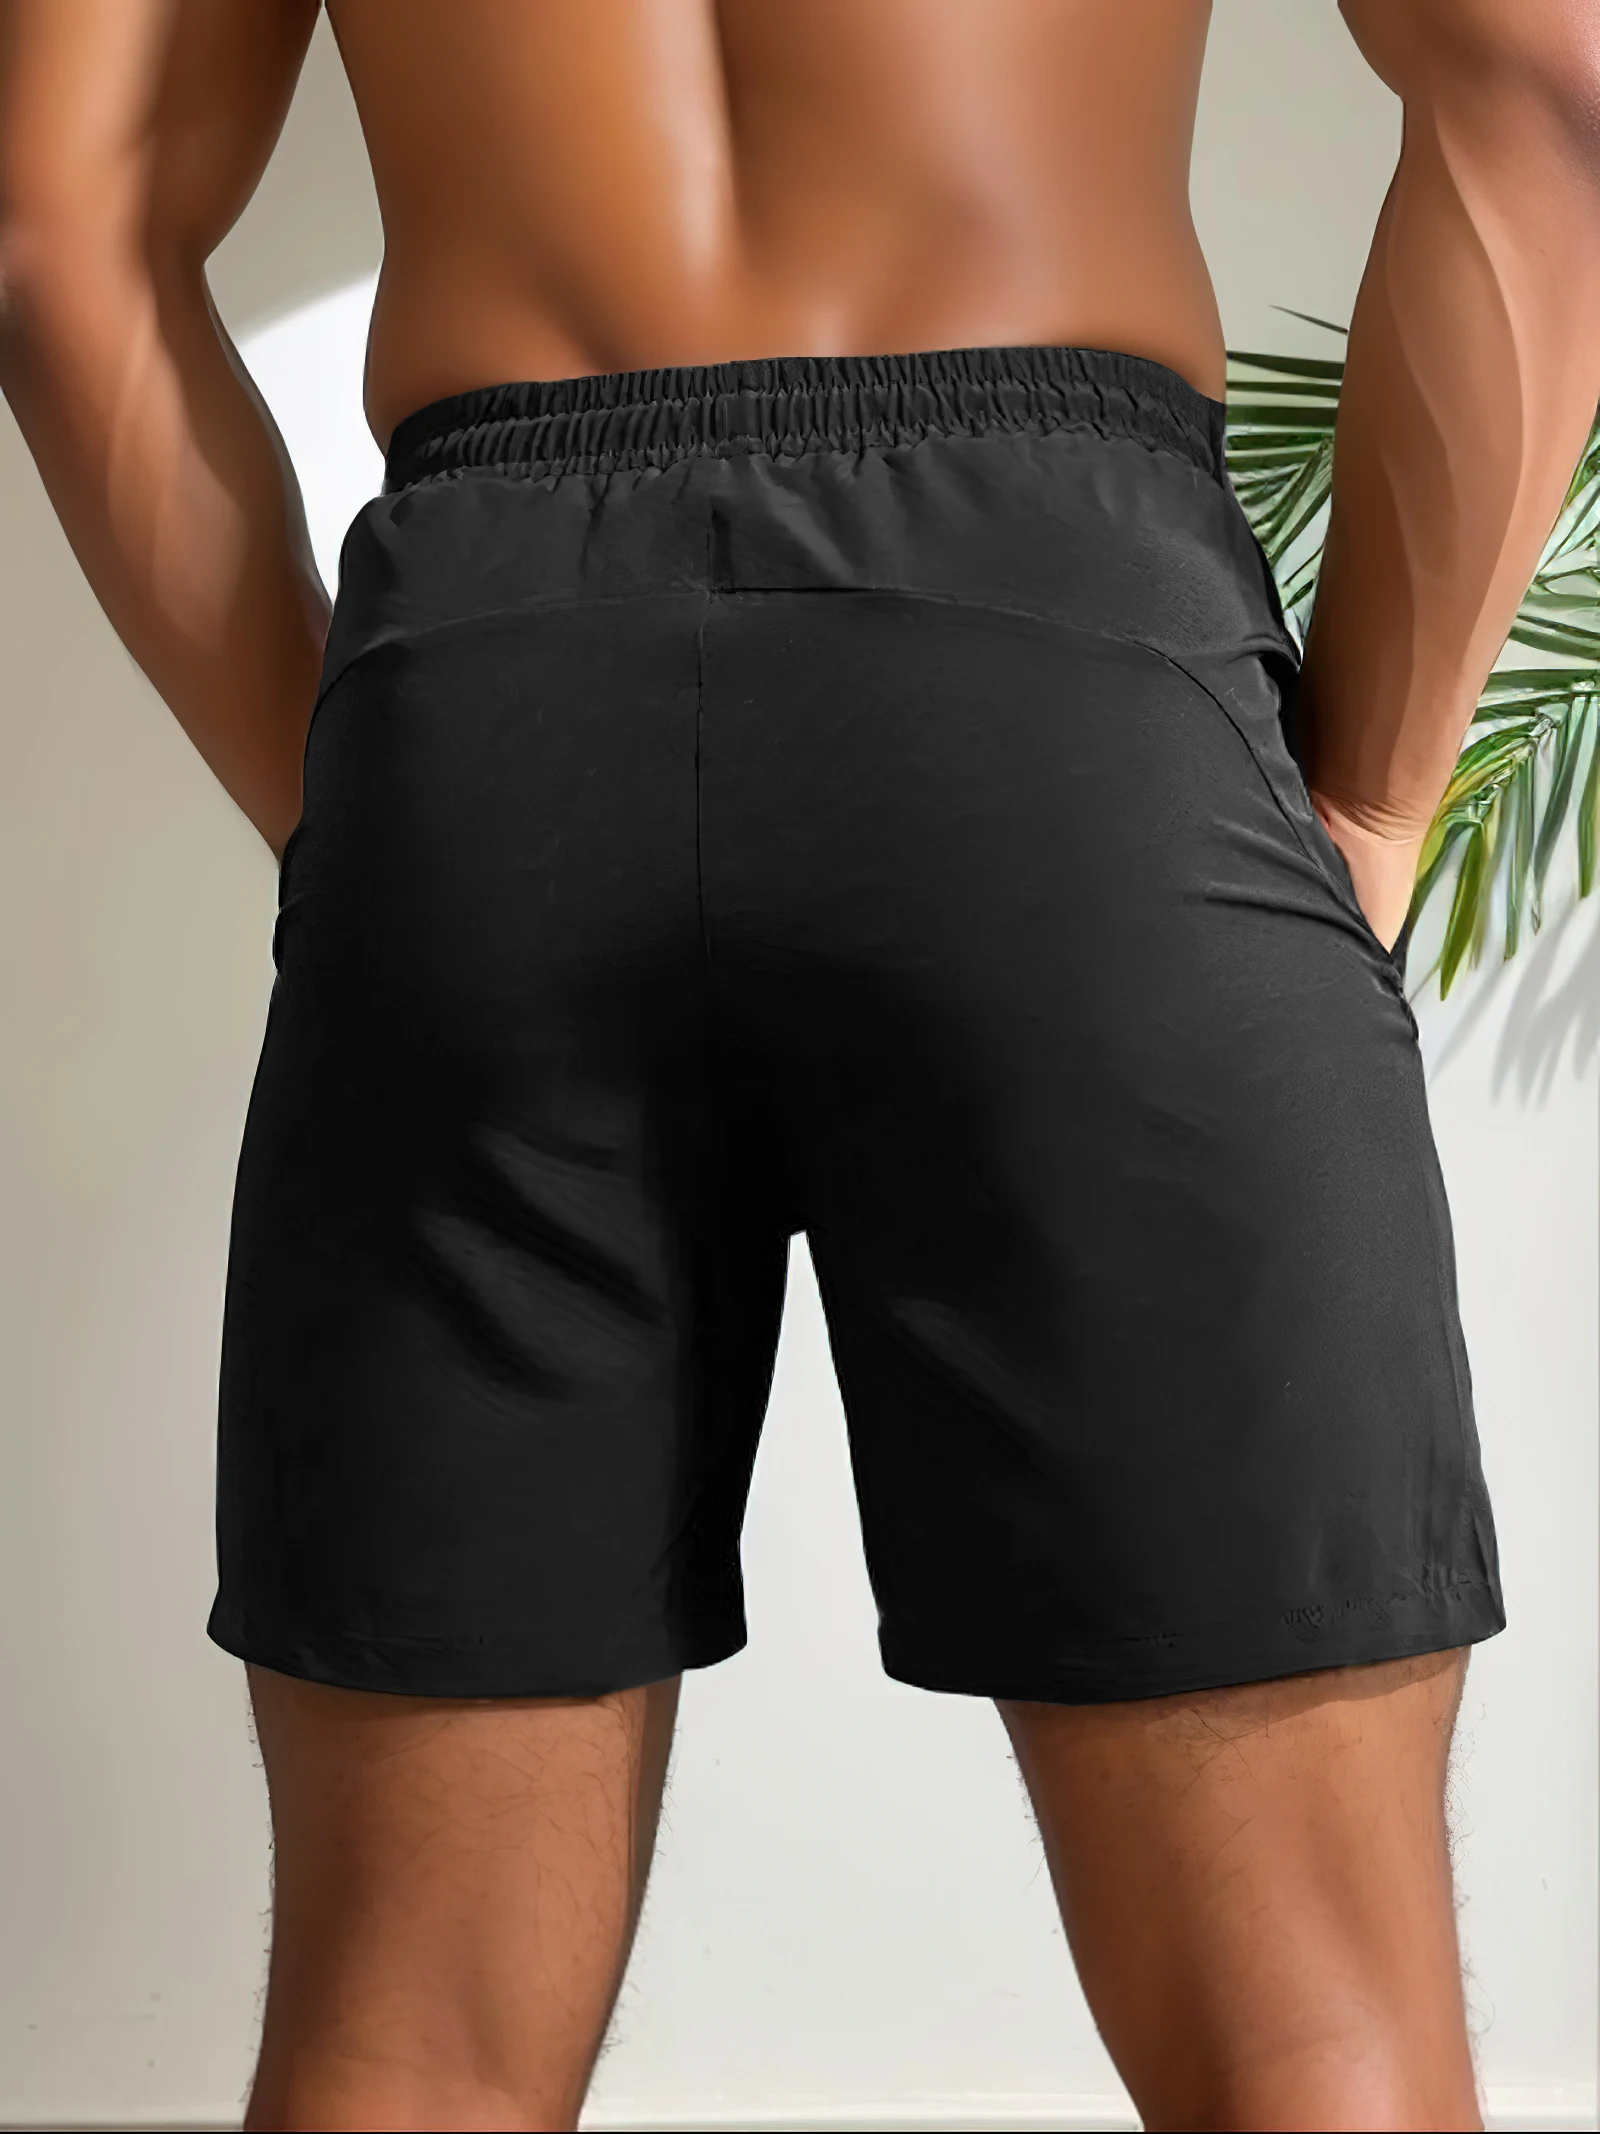 Men's shorts, sports, fitness, cycling, outdoor hiking shorts, running fast dry, cool, breathable, sweat absorbing, and micro el